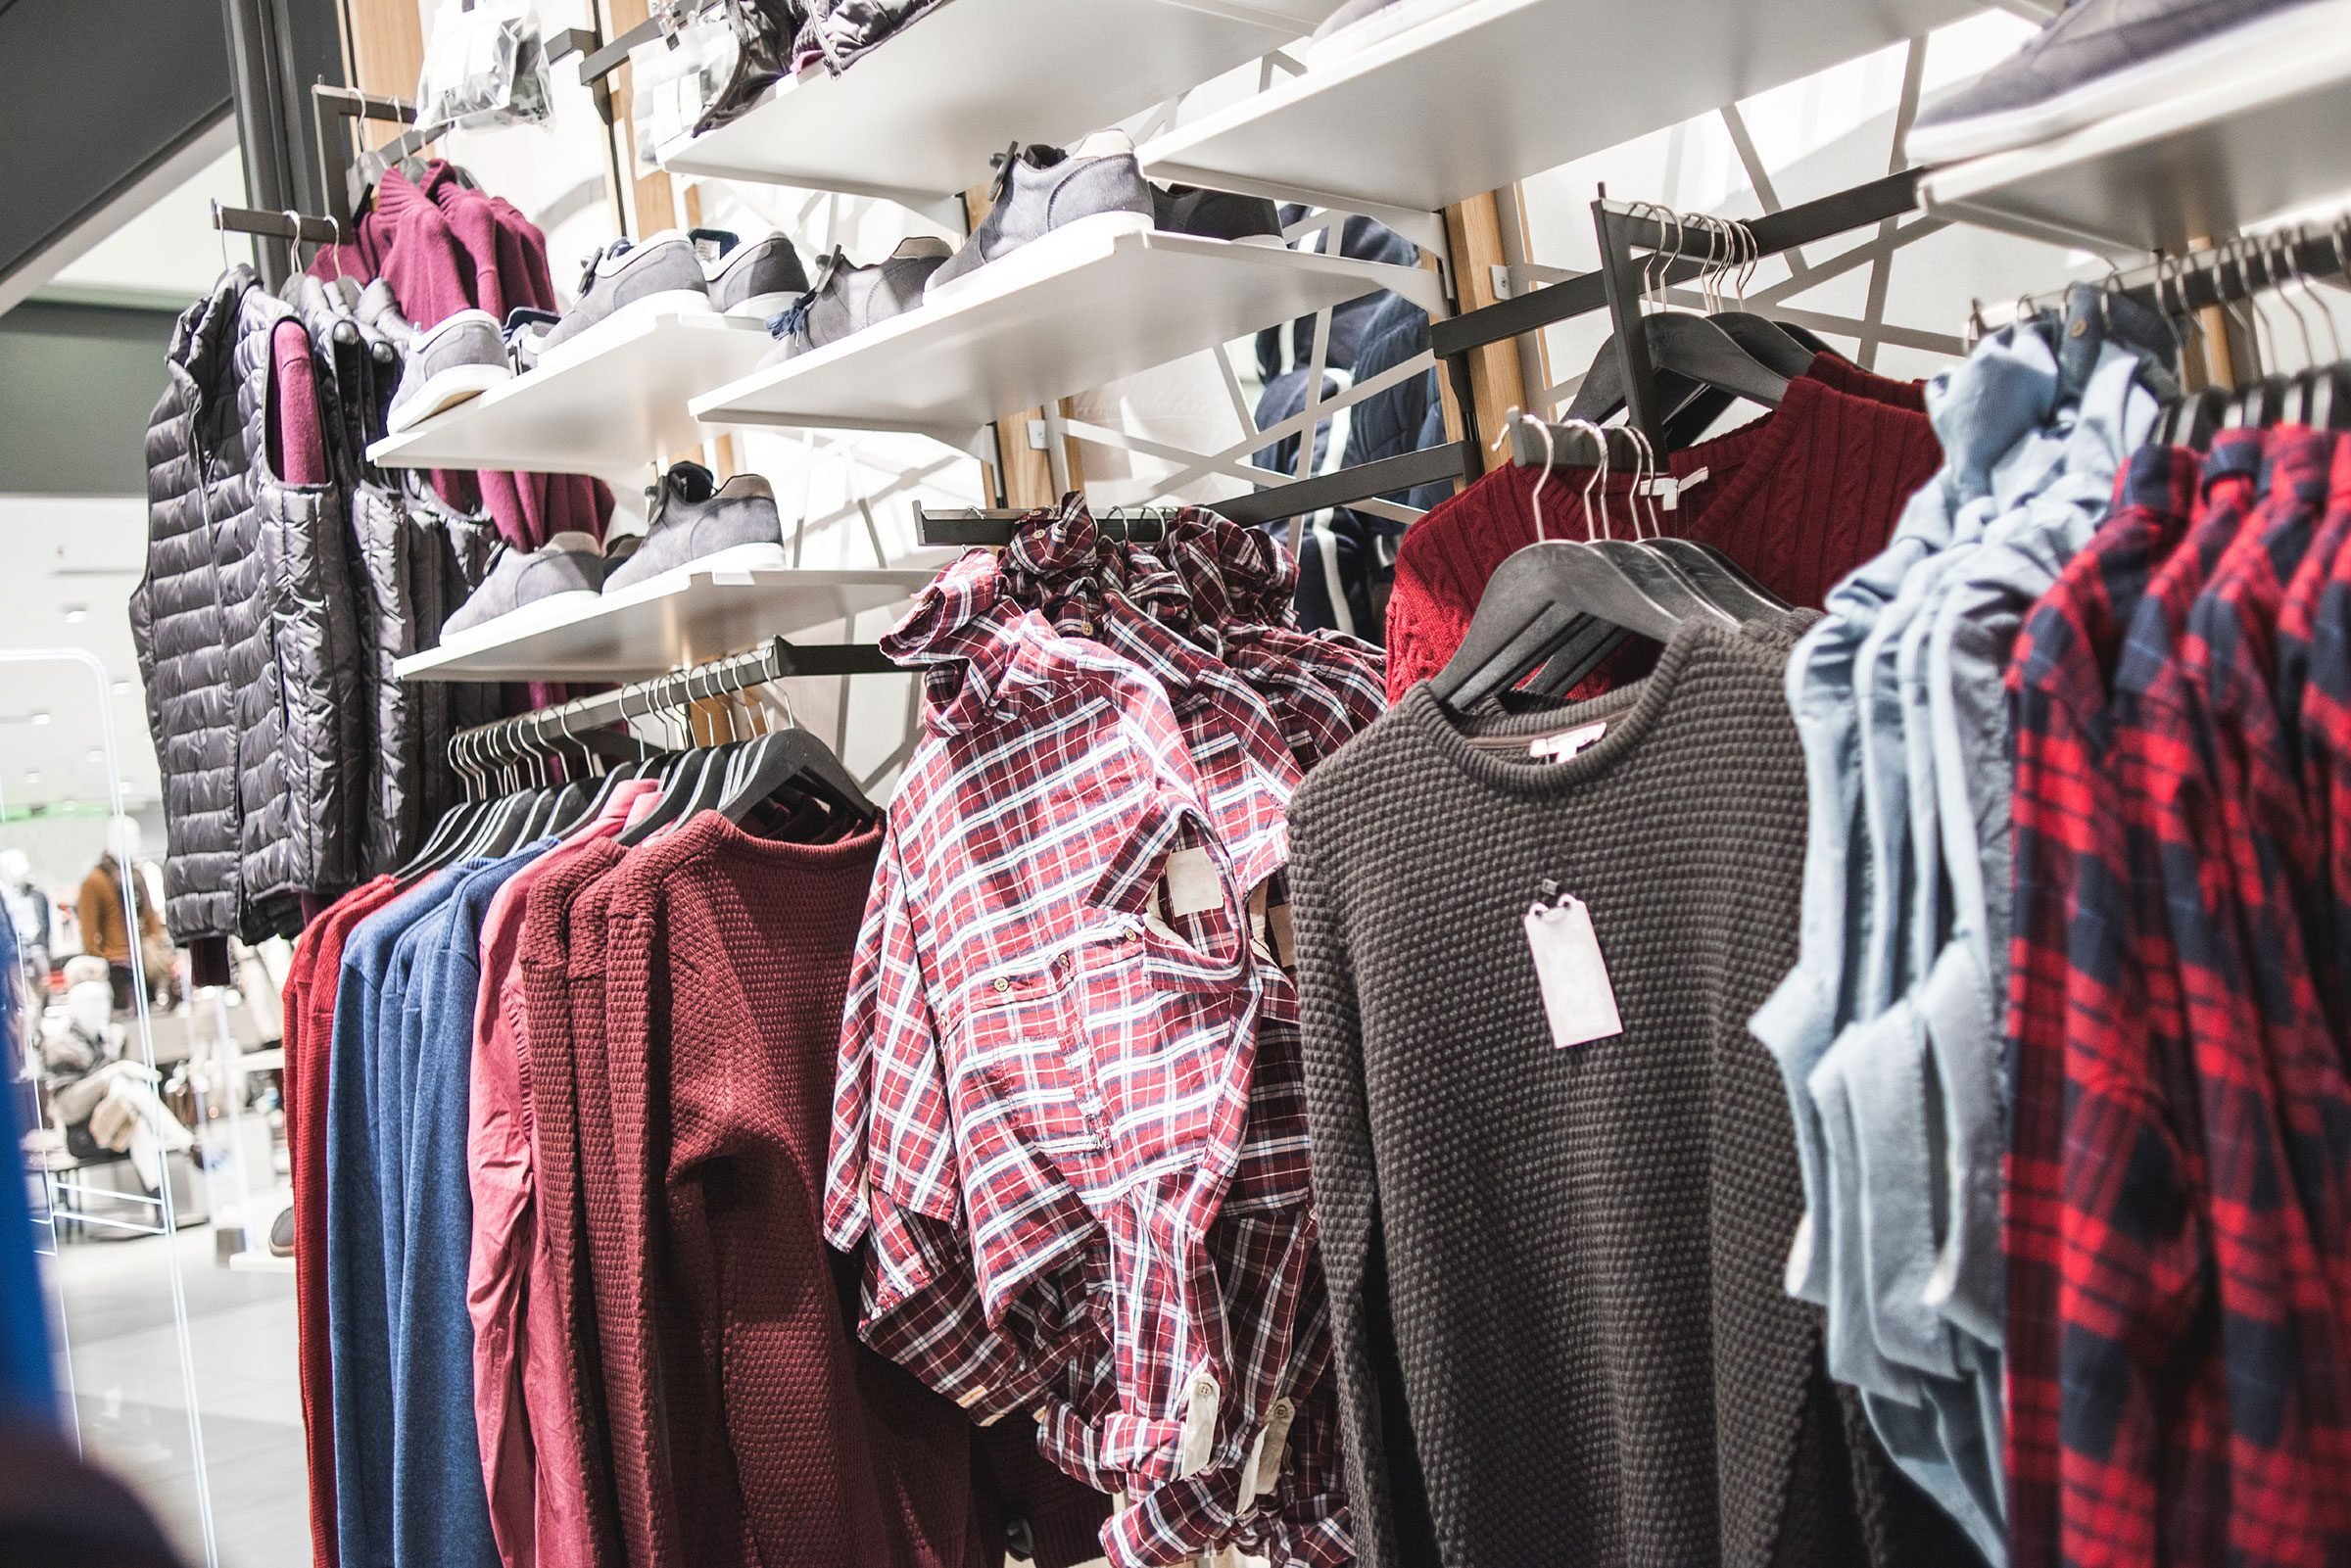 13 things thrift and consignment shops don't tell you | reader's digest